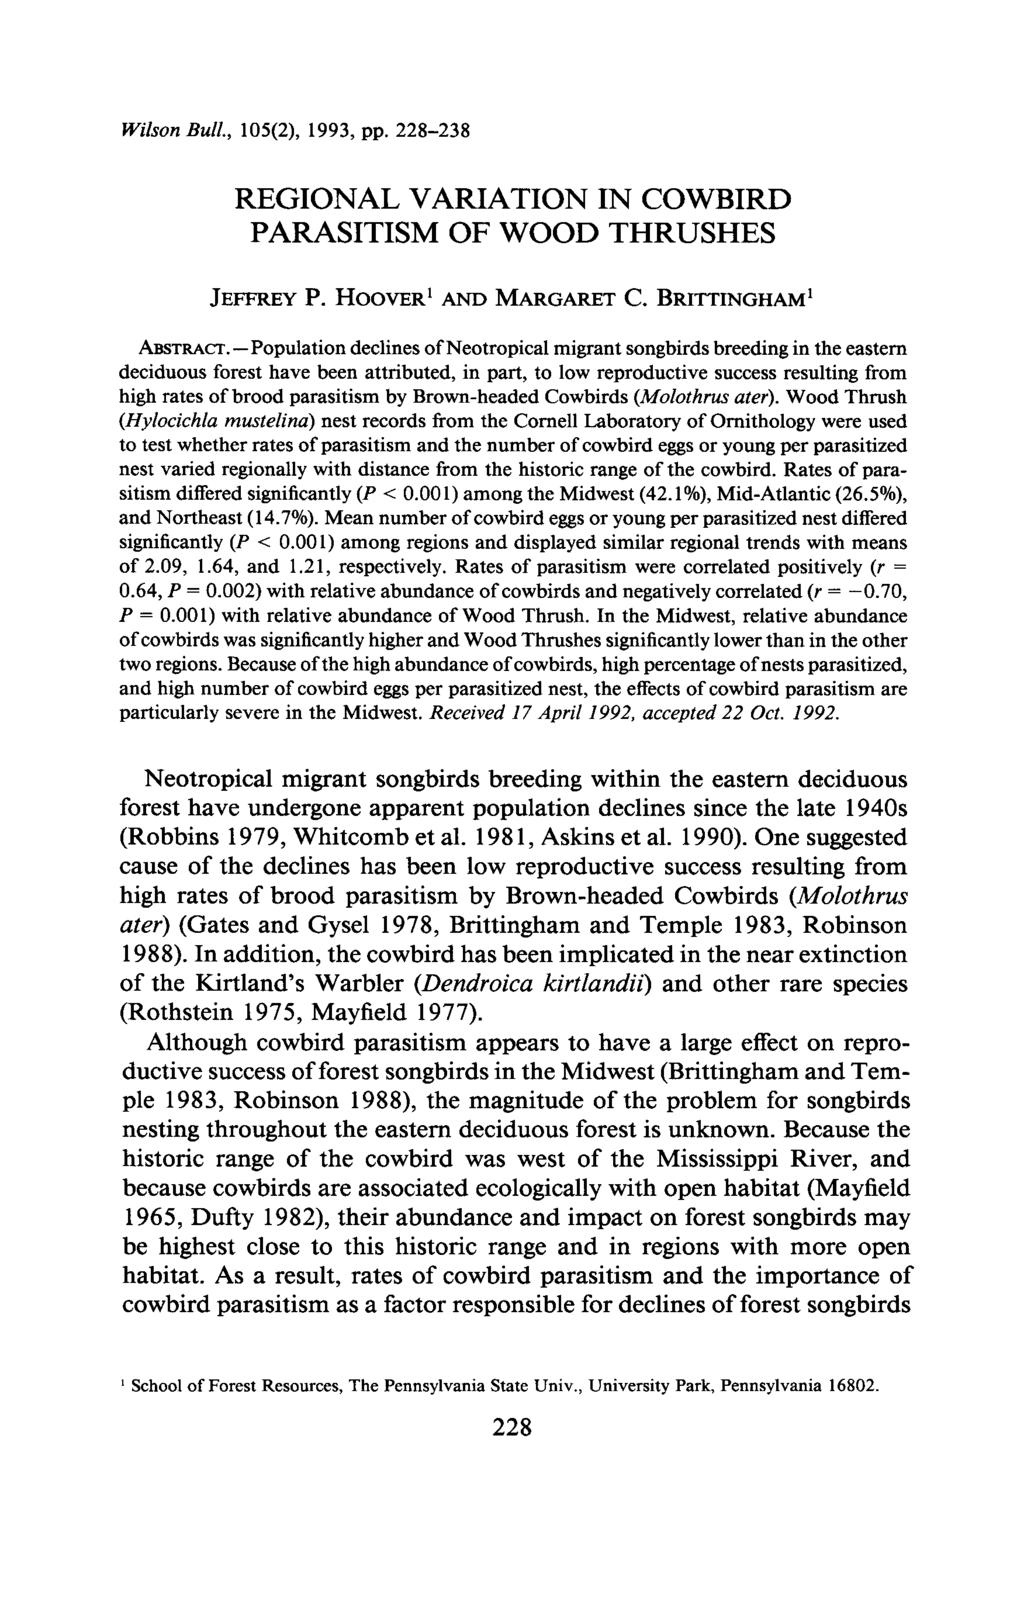 Wilson Bull, 105(2), 1993, pp 228-238 REGIONAL VARIATION IN COWBIRD PARASITISM OF WOOD THRUSHES JEFFREY P HOOVER AND MARGARET C BRITTINGHAM ABSTRACT - Population declines of Neotropical migrant